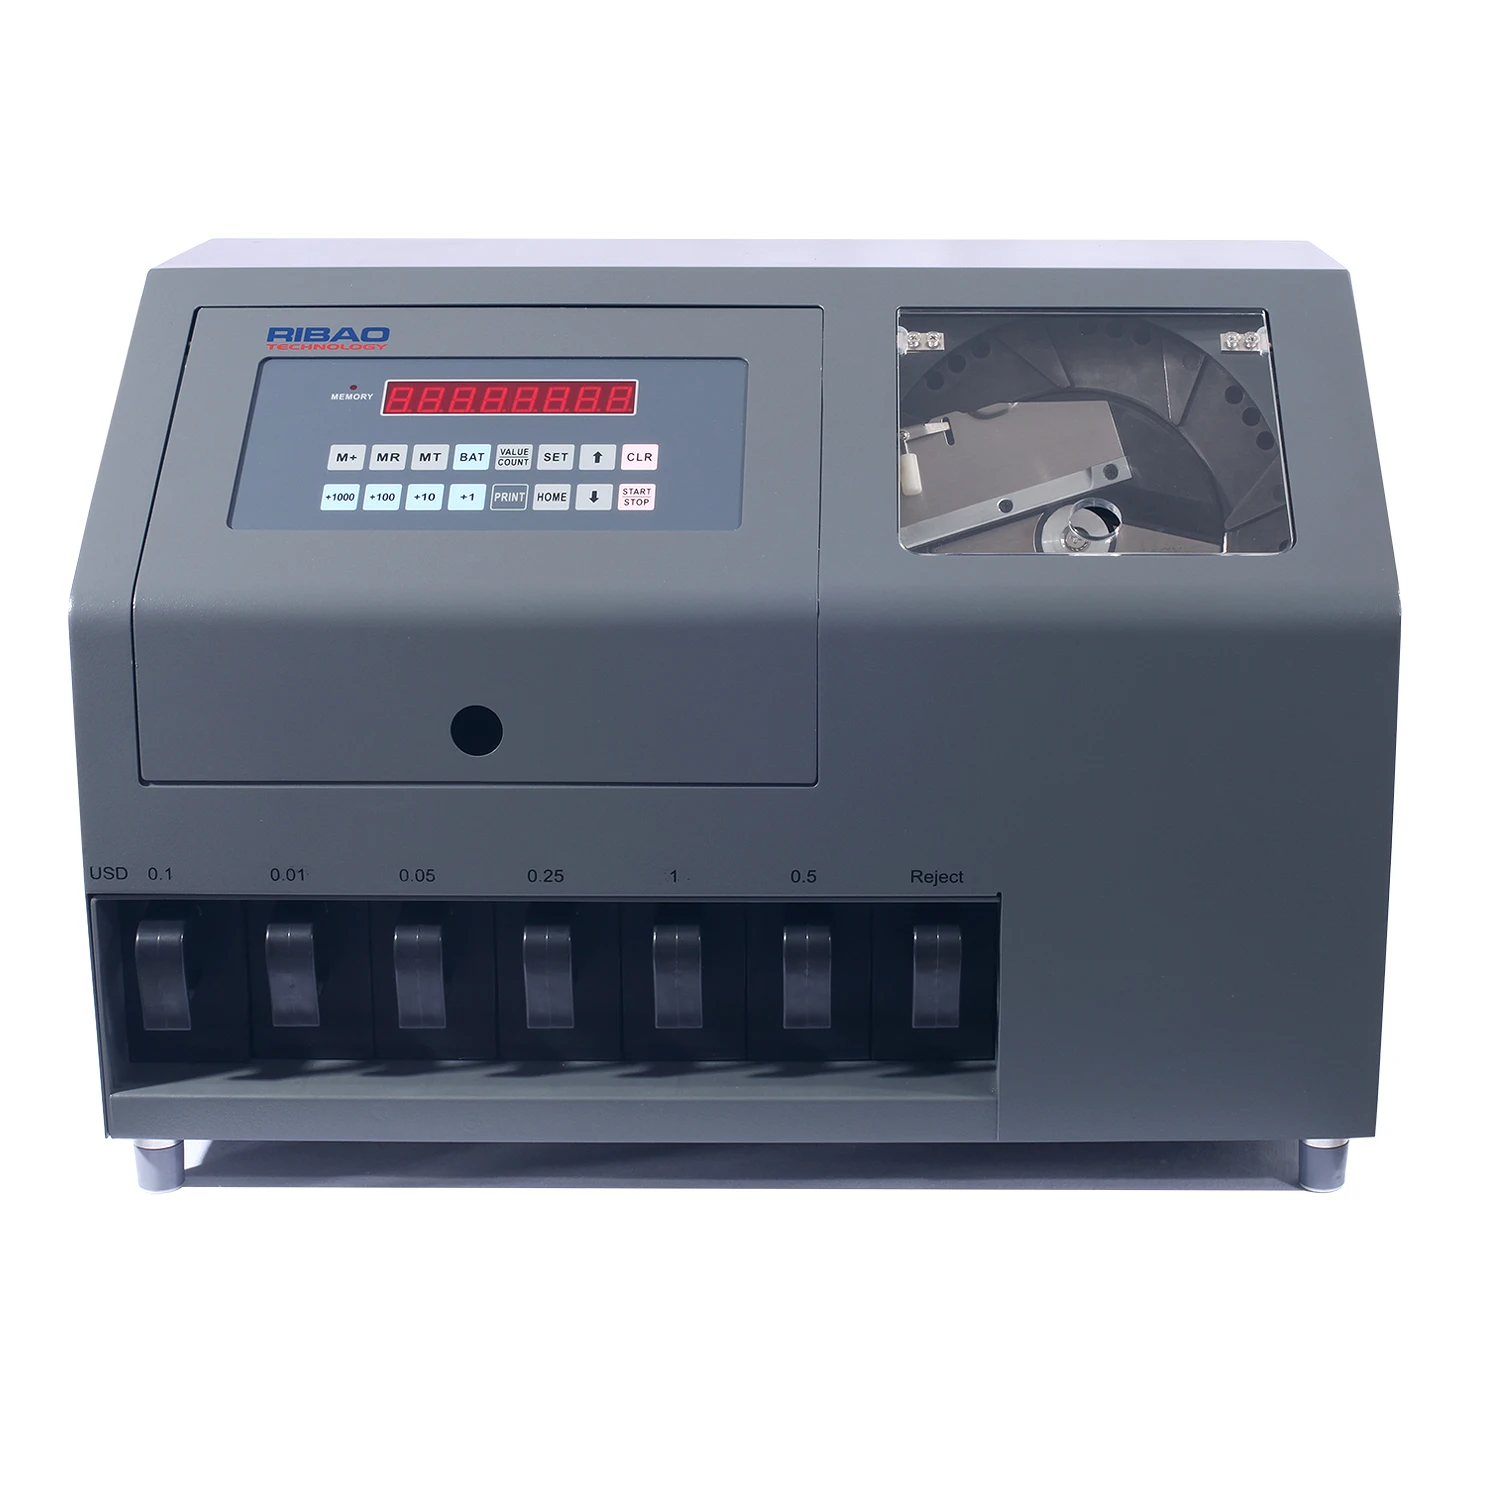 

RIBAO High Speed Coin Counter CS-600B 7-Pocket Bank Grade Coin Sorter LED screen Coin Counting Machine for Bank 2 years warranty